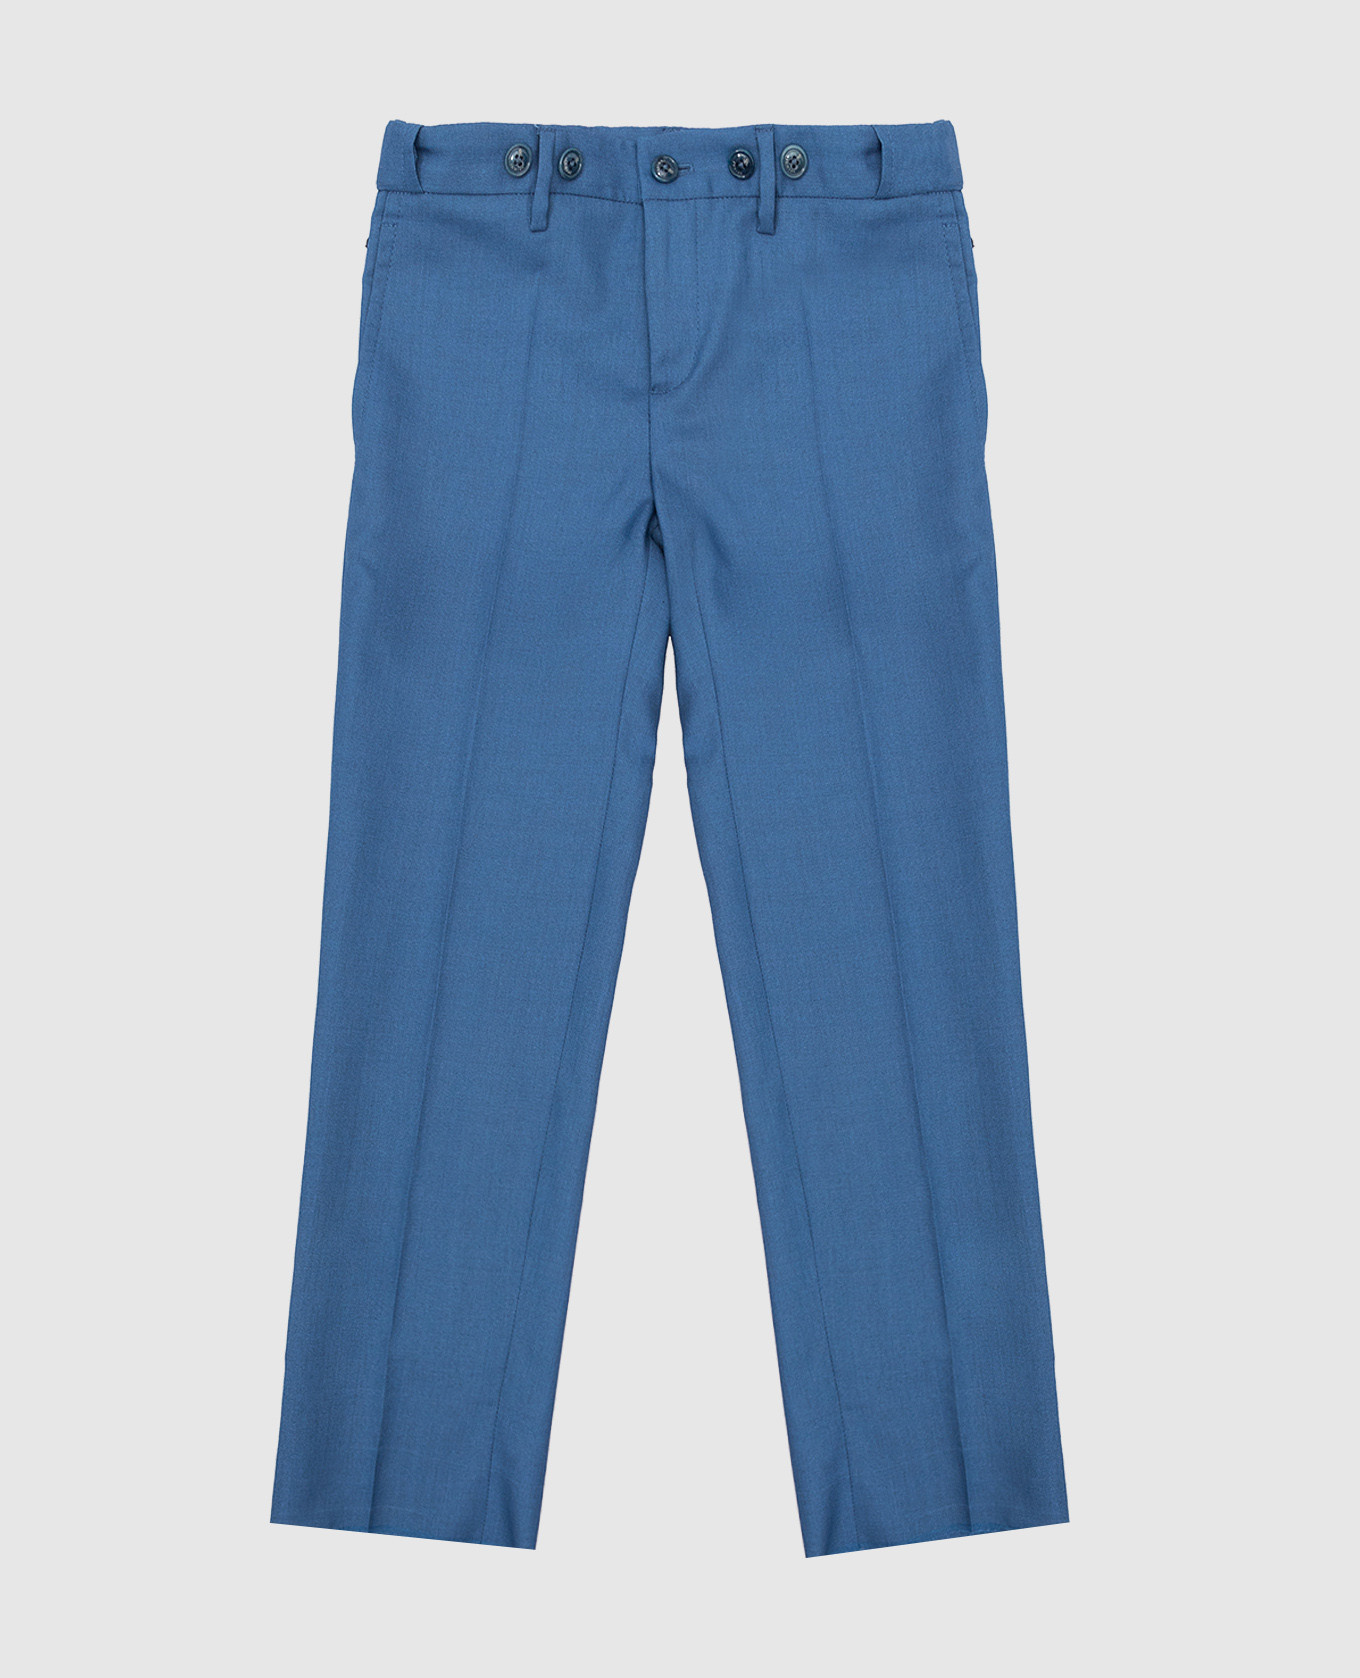 Children's blue trousers in wool and silk